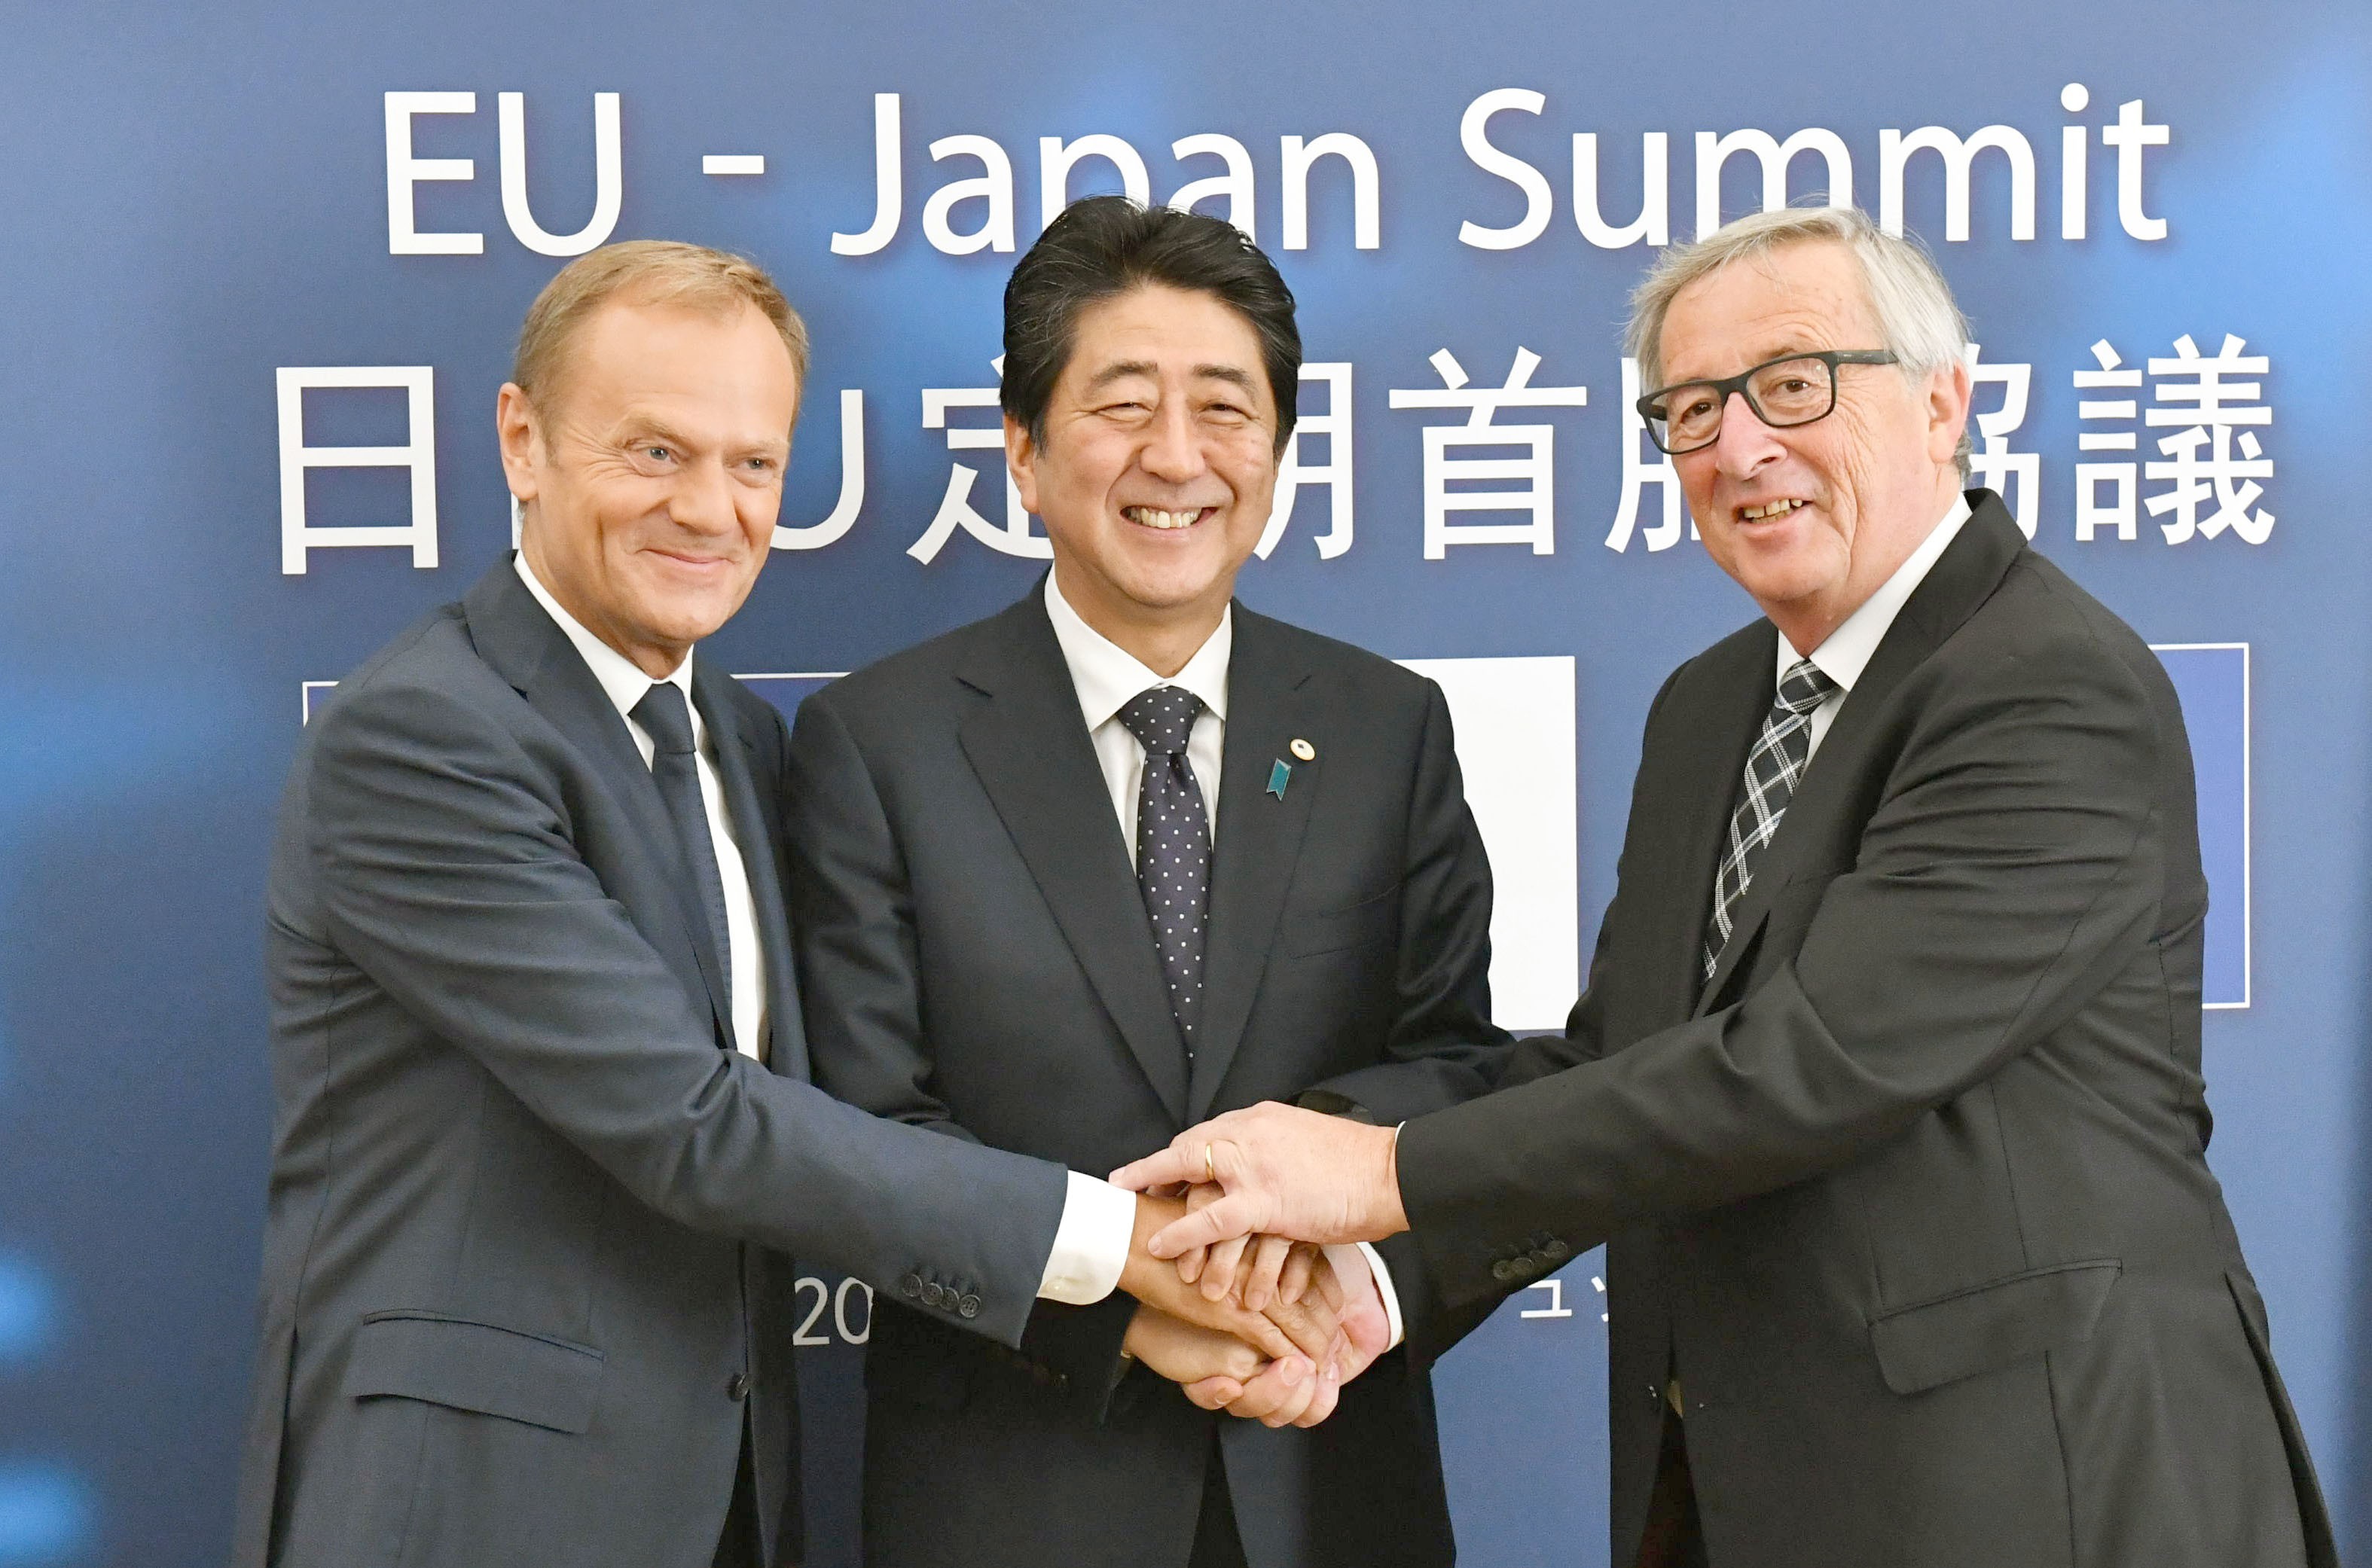 Japanese Prime Minister Shinzo Abe with European Council President Donald Tusk (left) and Jean-Claude Junker, president of the European Commission, before talks in Brussels on July 6. Japan and the European Union later announced a broad agreement on a free trade deal. Photo: Kyodo